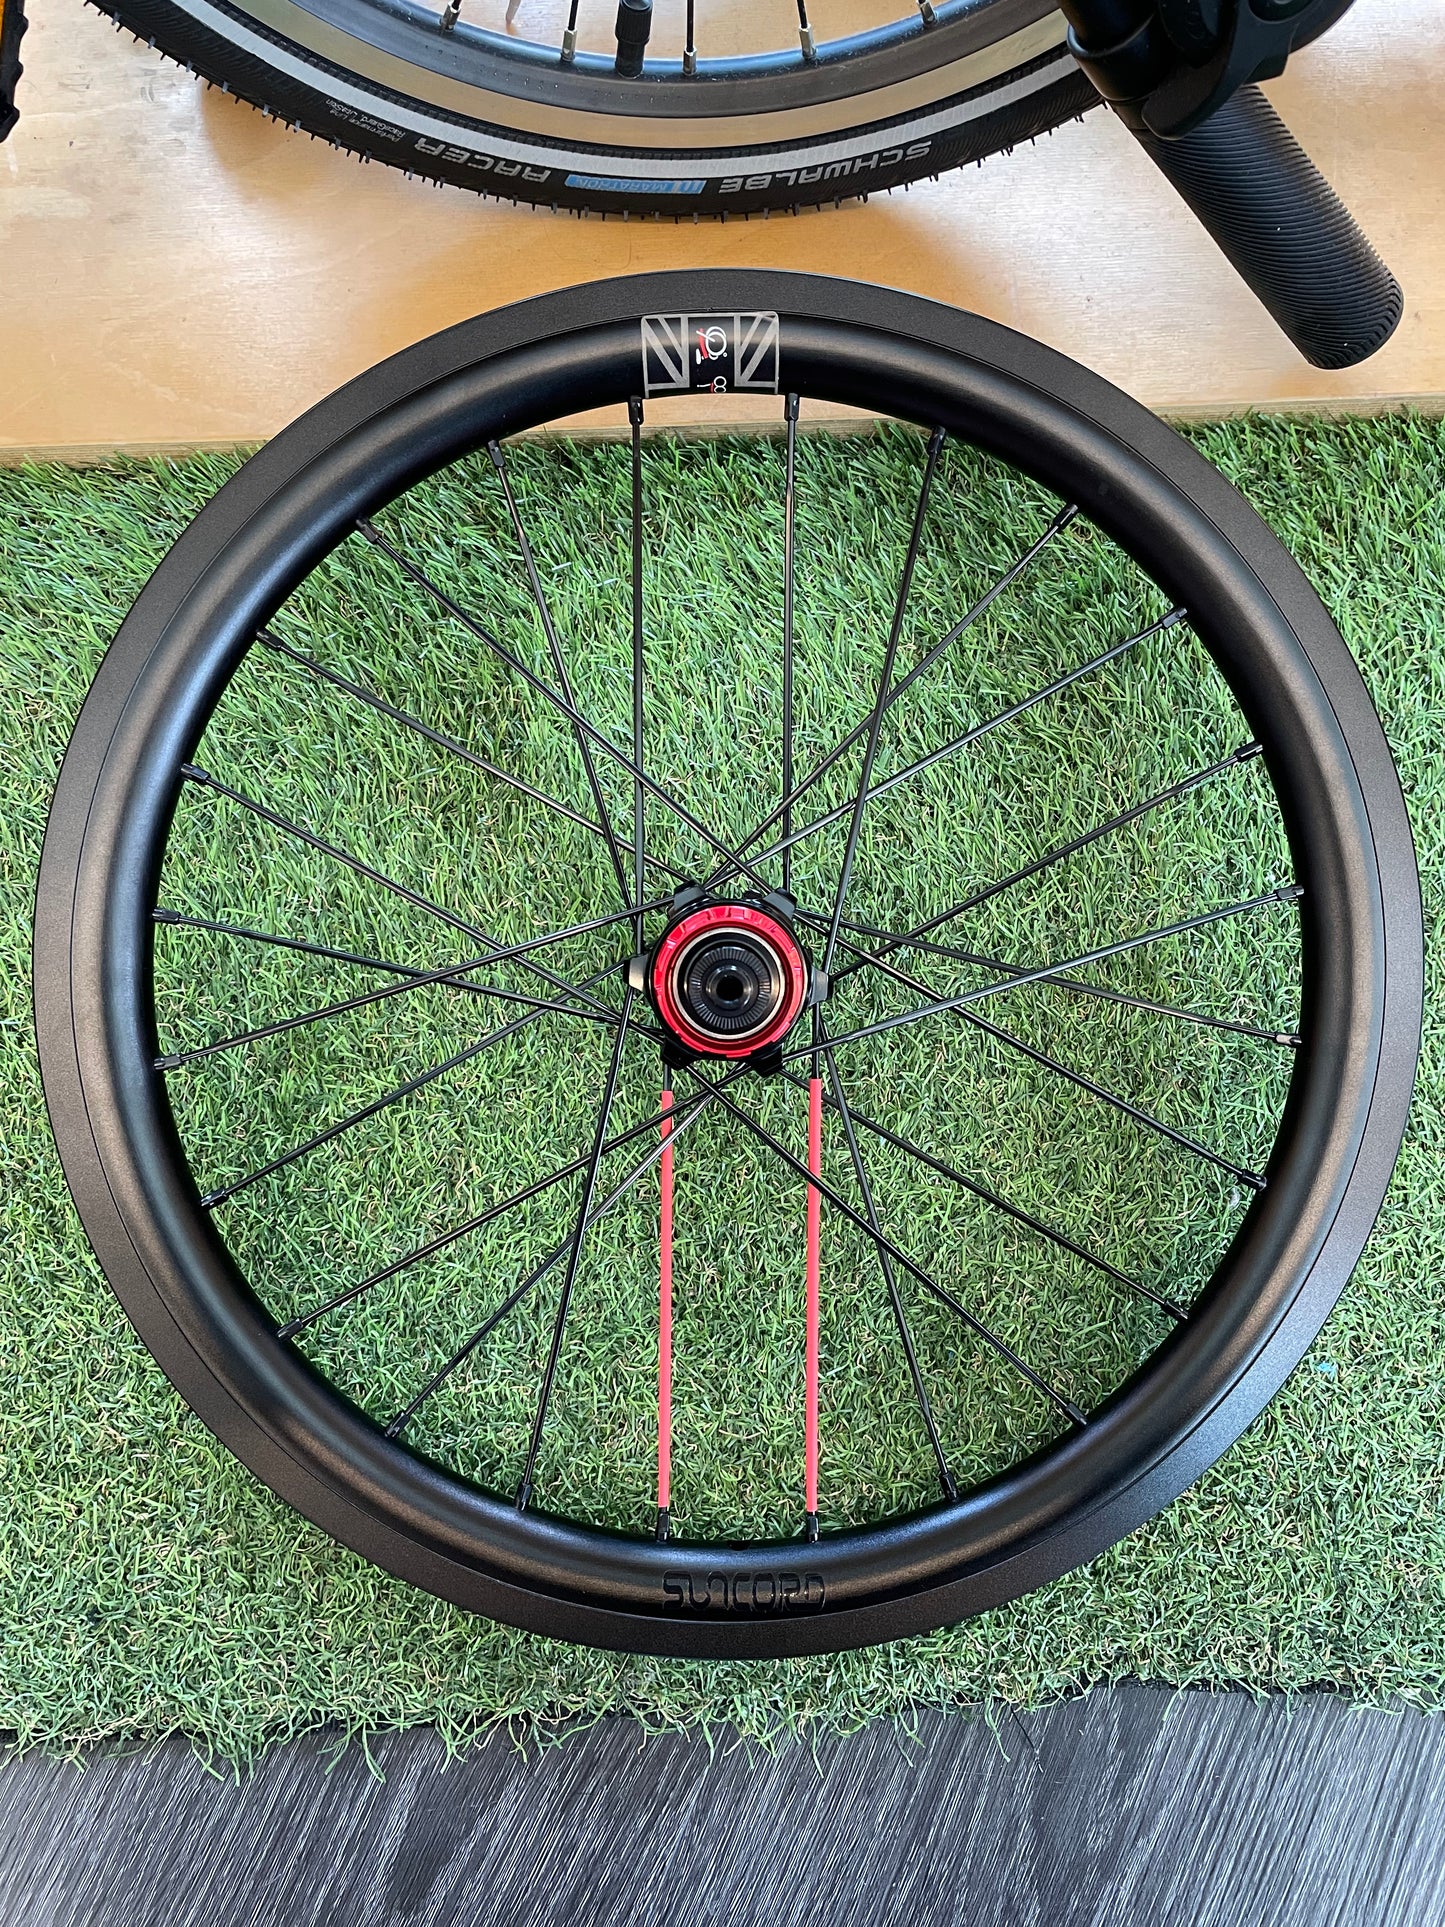 Suncord 16” Aluminium 7 Speed Wheelset Ceramic bearings with magnetic pawl assist for Brompton